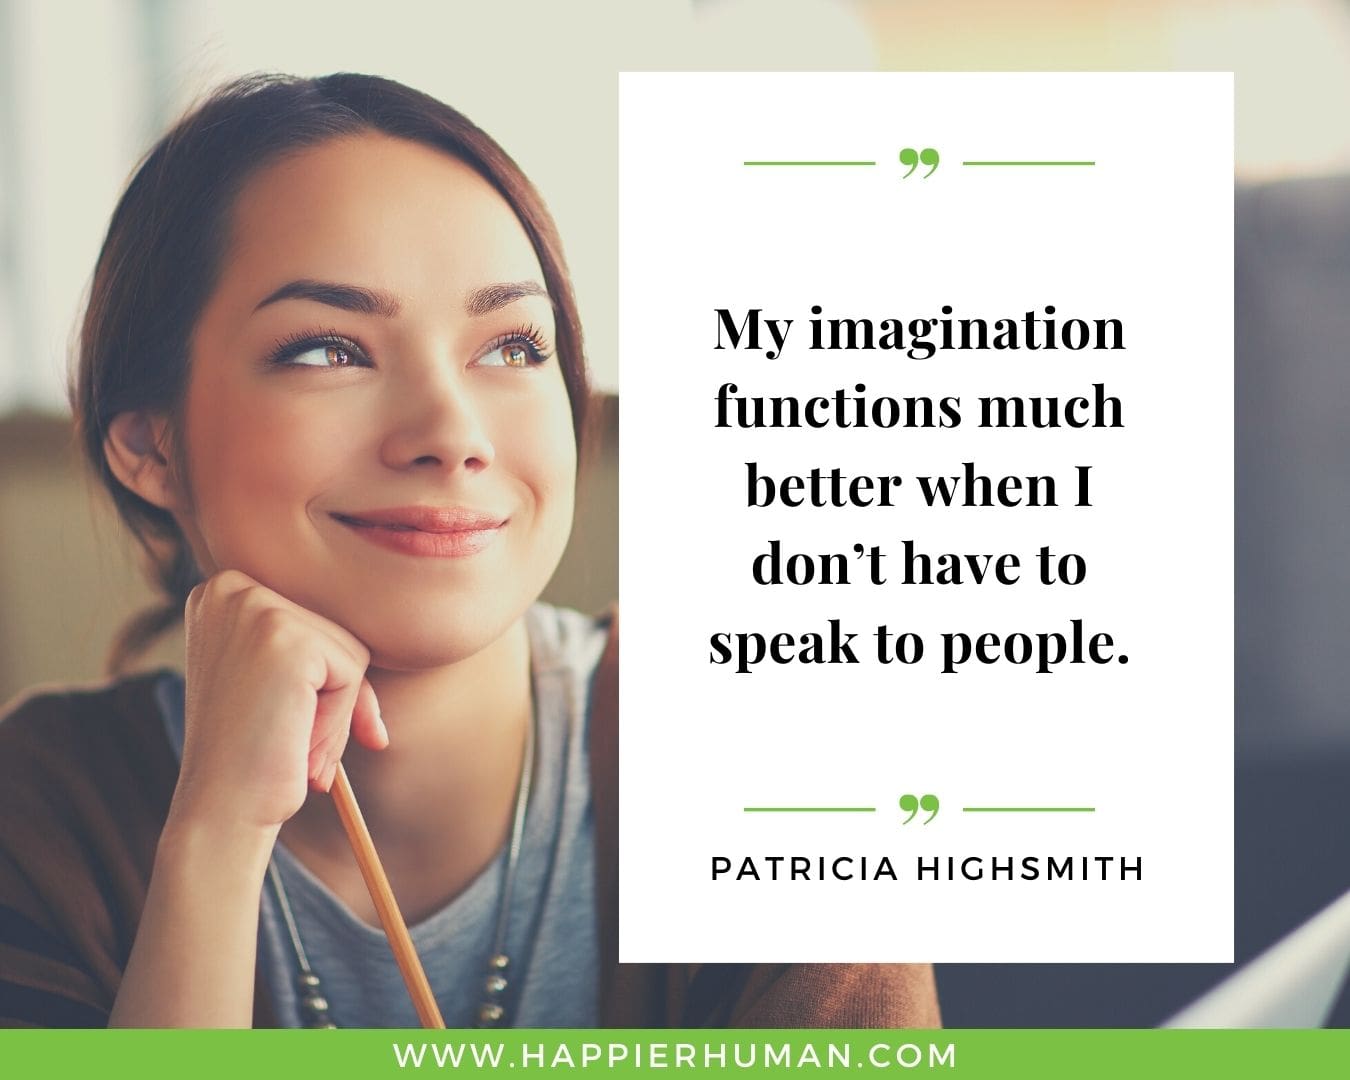 Introvert Quotes - “My imagination functions much better when I don’t have to speak to people.” – Patricia Highsmith